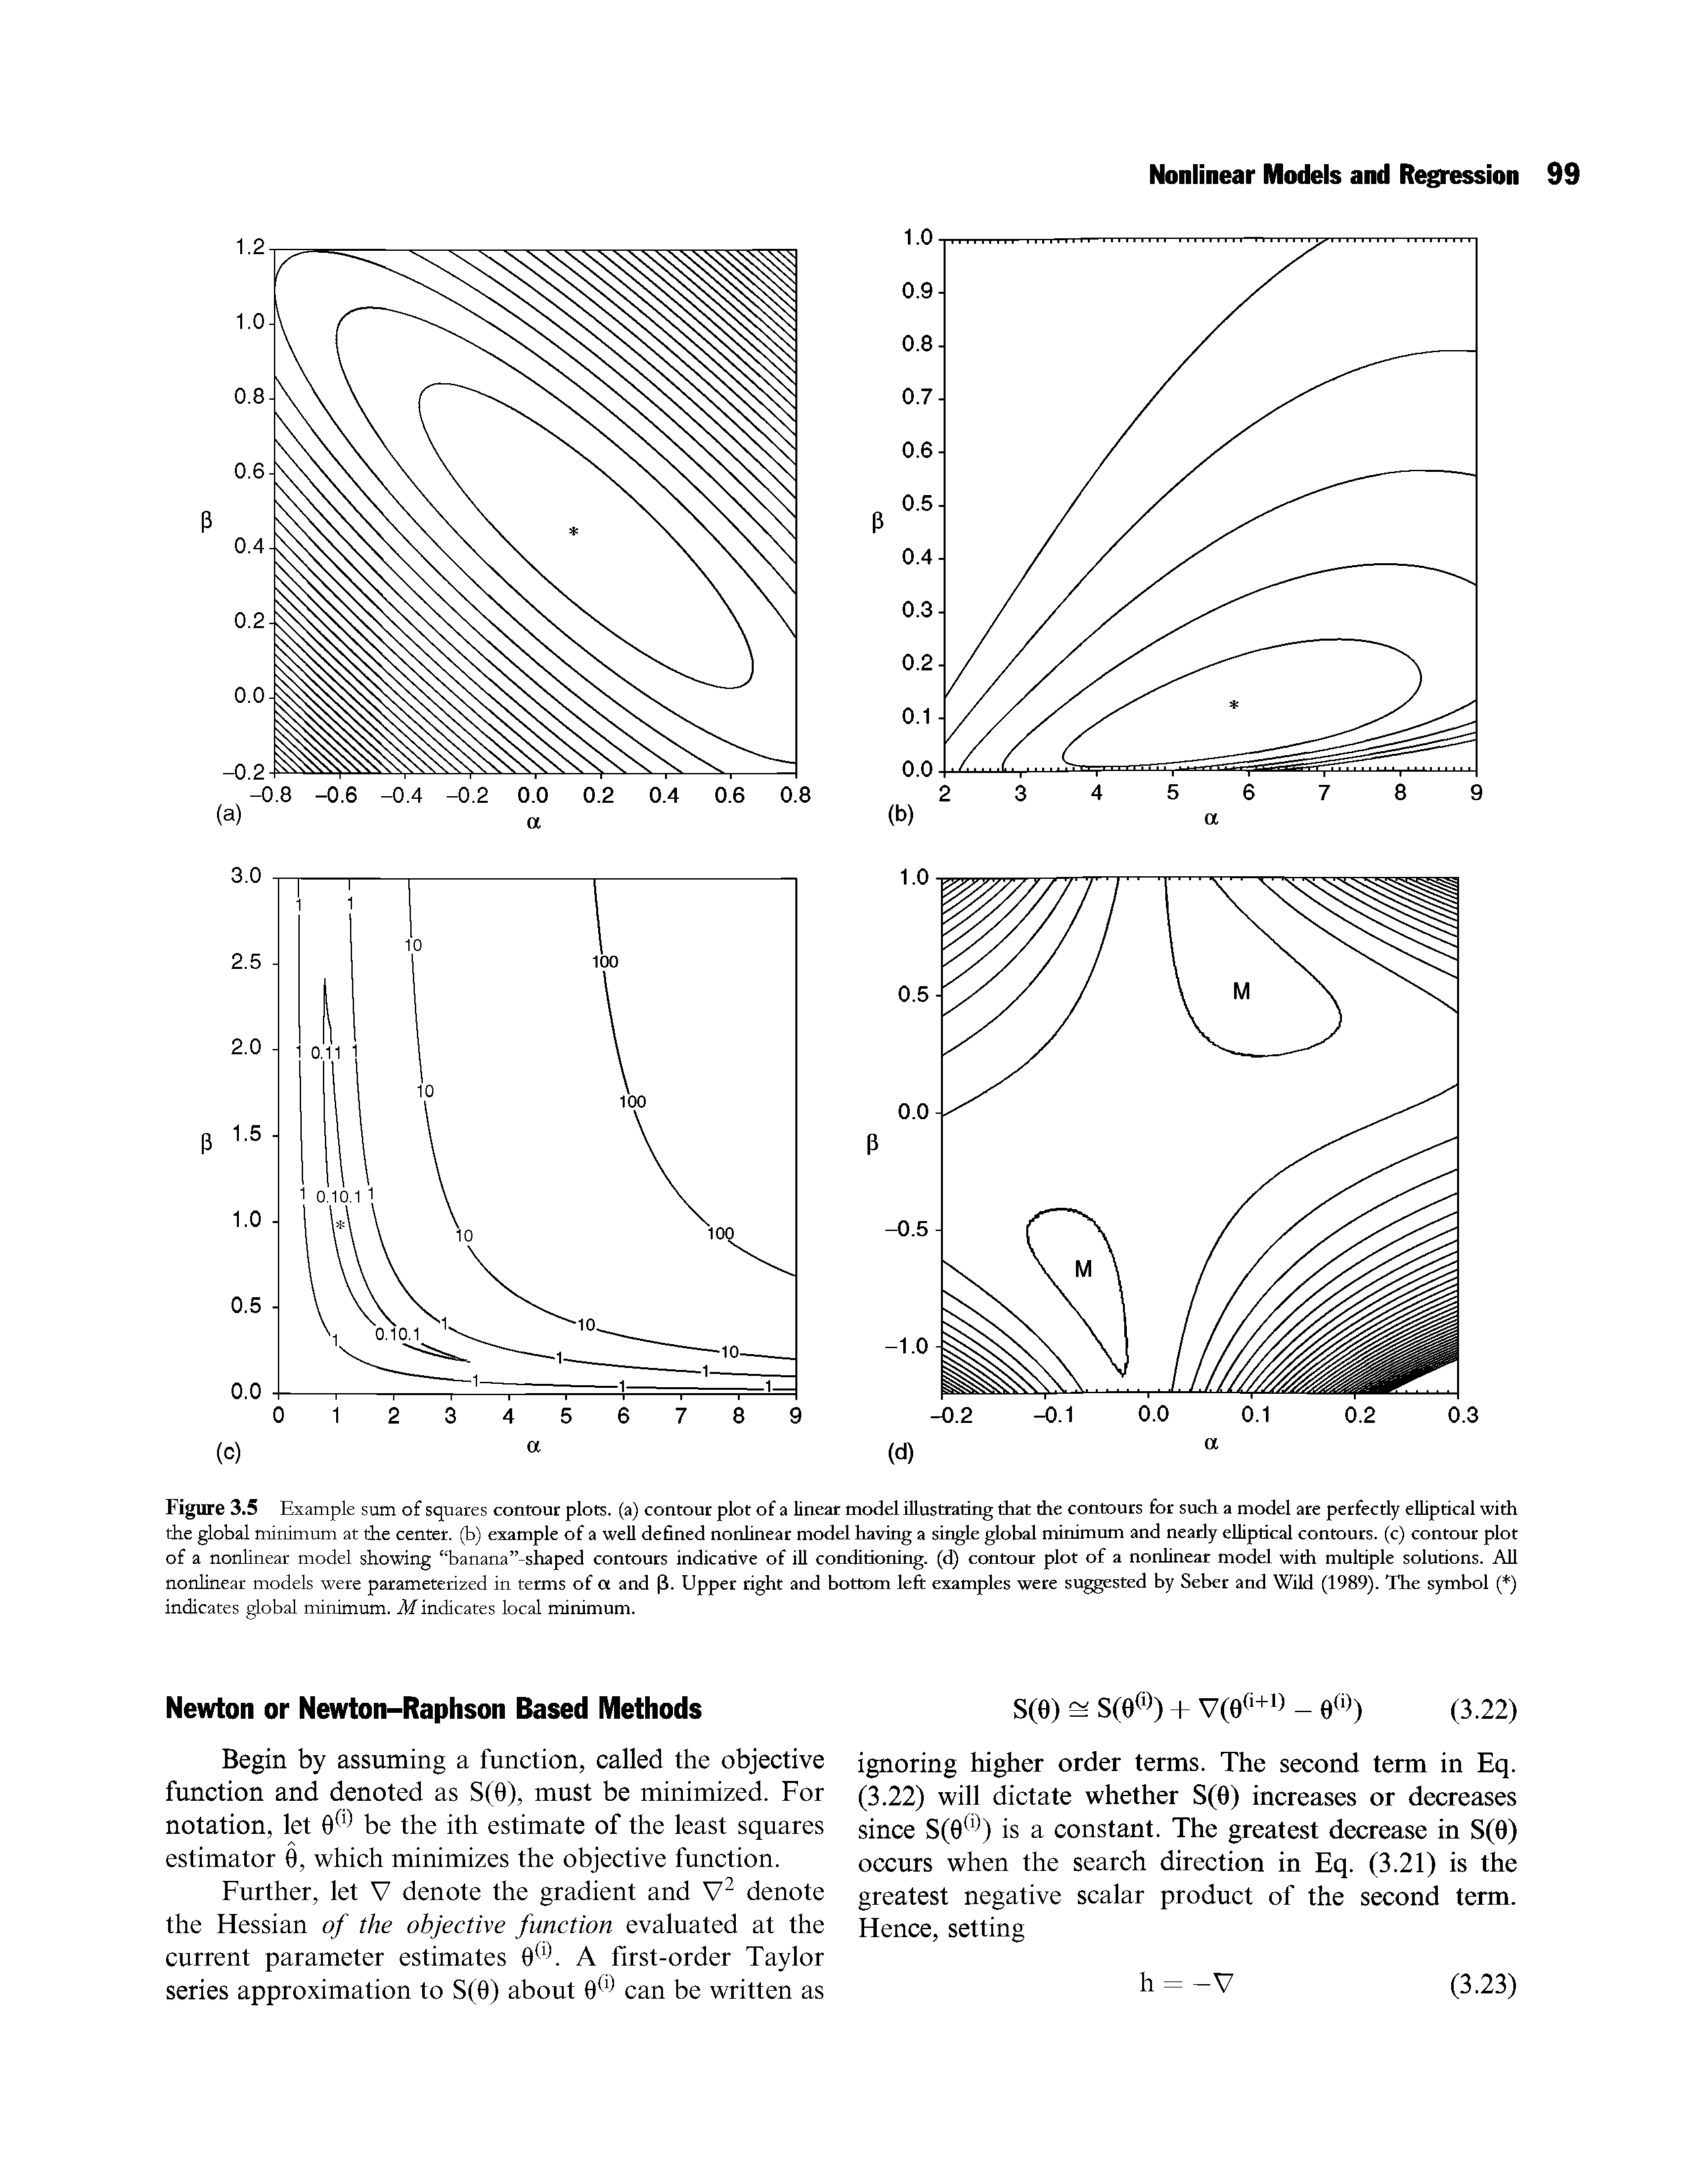 Figure 3.5 Example sum of squares contour plots, (a) contour plot of a linear model illustrating that the contours for such a model are perfecdy elliptical with the global minimum at the center, (b) example of a well defined nonlinear model having a single global minimum and nearly elliptical contours, (c) contour plot of a nonlinear model showing banana -shaped contours indicative of ill conditioning, (d) contour plot of a nonlinear model with multiple solutions. All nonlinear models were parameterized in terms of a and (3. Upper right and bottom left examples were suggested by Seber and Wild (1989). The symbol ( ) indicates global minimum. M indicates local minimum.